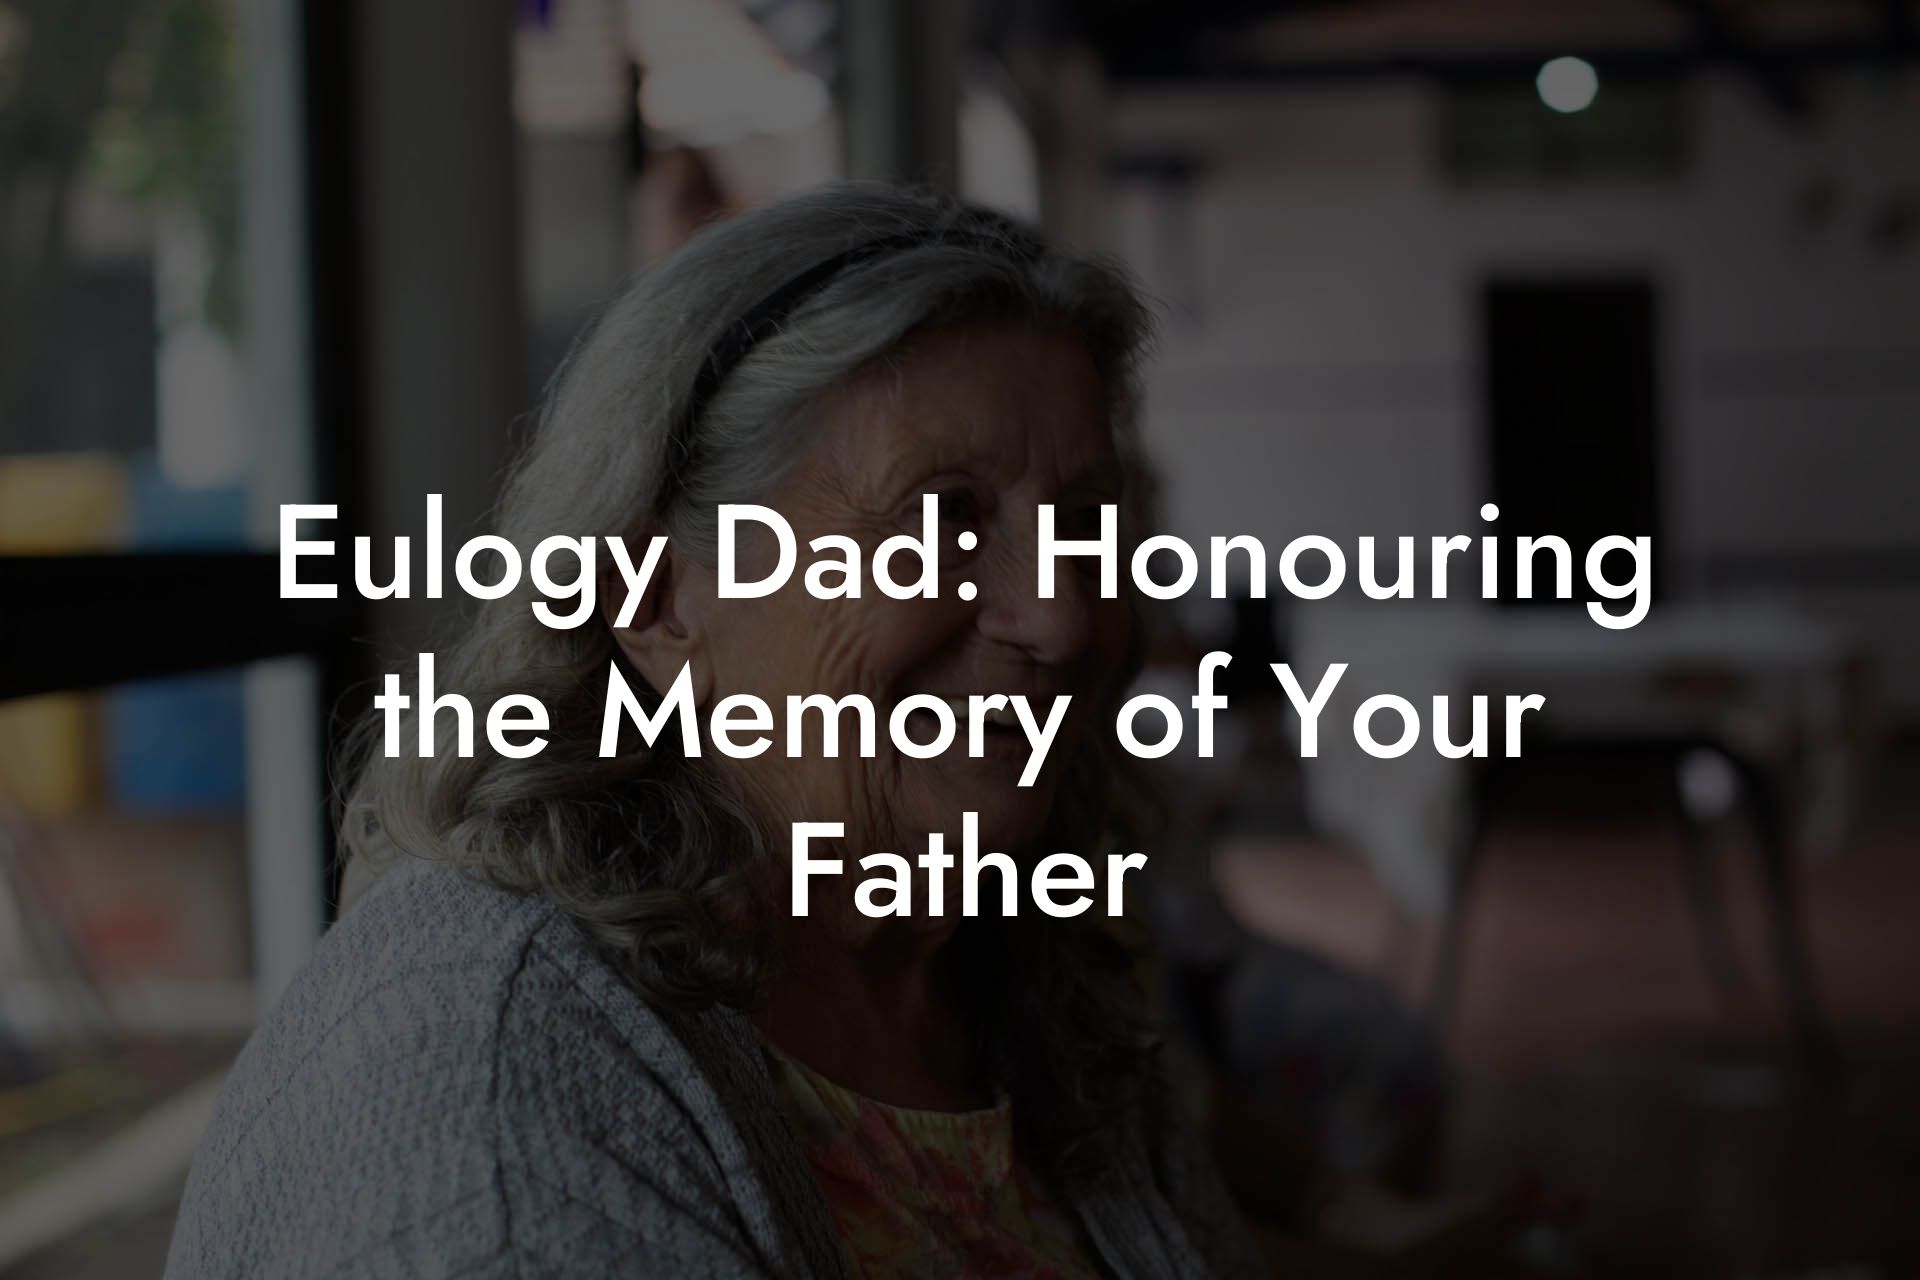 Eulogy Dad: Honouring the Memory of Your Father